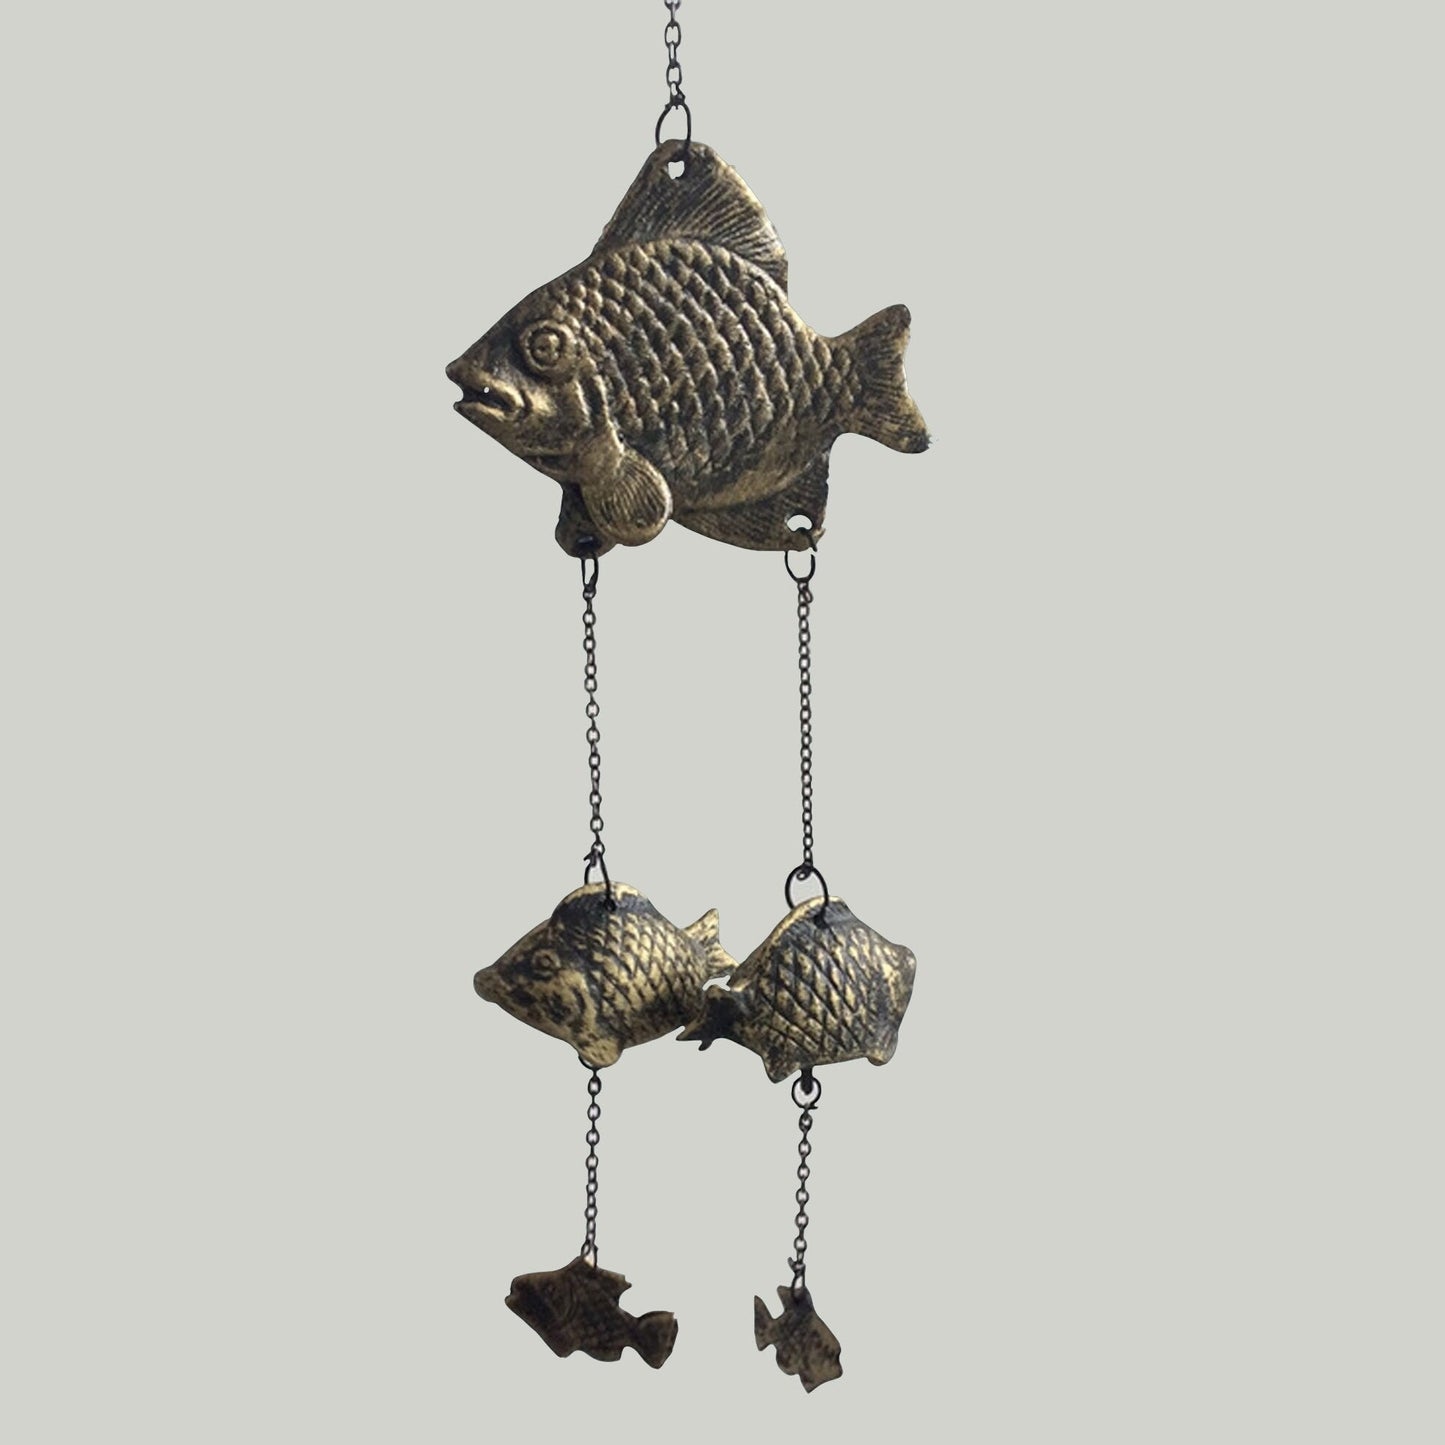 Cute Metal Fish Wind Chime, Traditional Japanese Koi Bronze Bell Ring Windchime